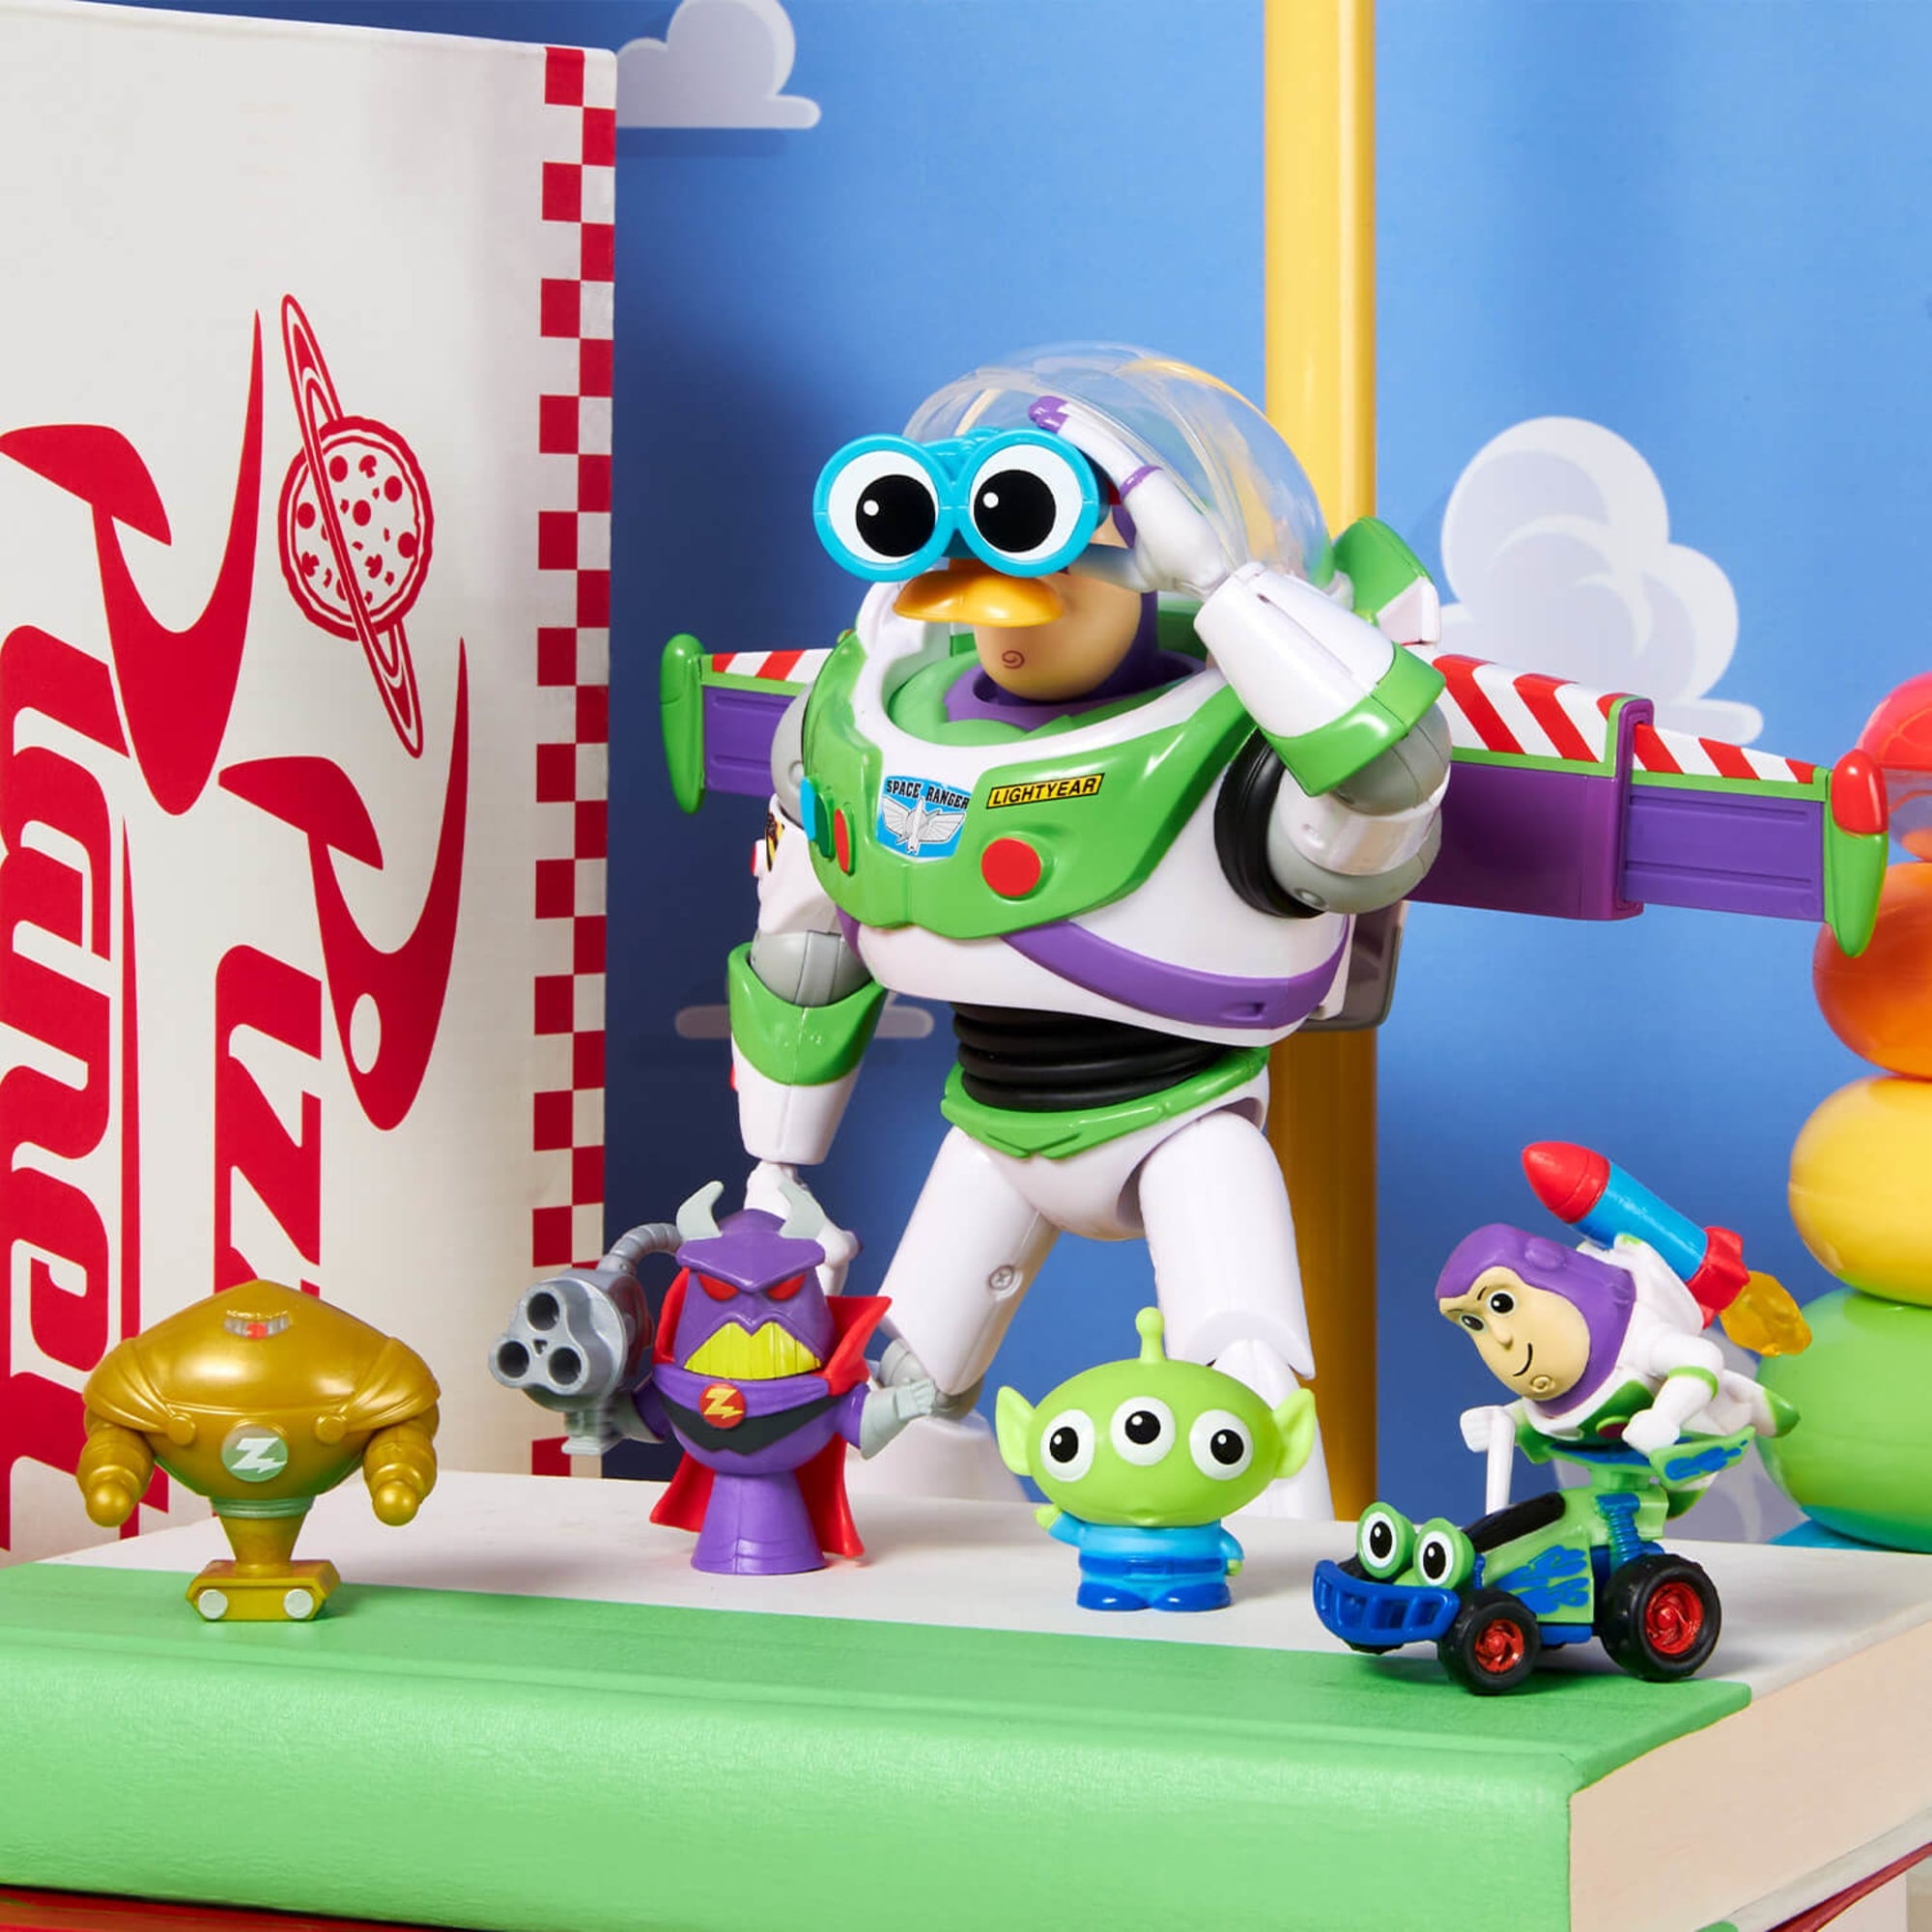 Disney+ Unveils New Pixar Collection for Cars, Toy Story & More Shorts